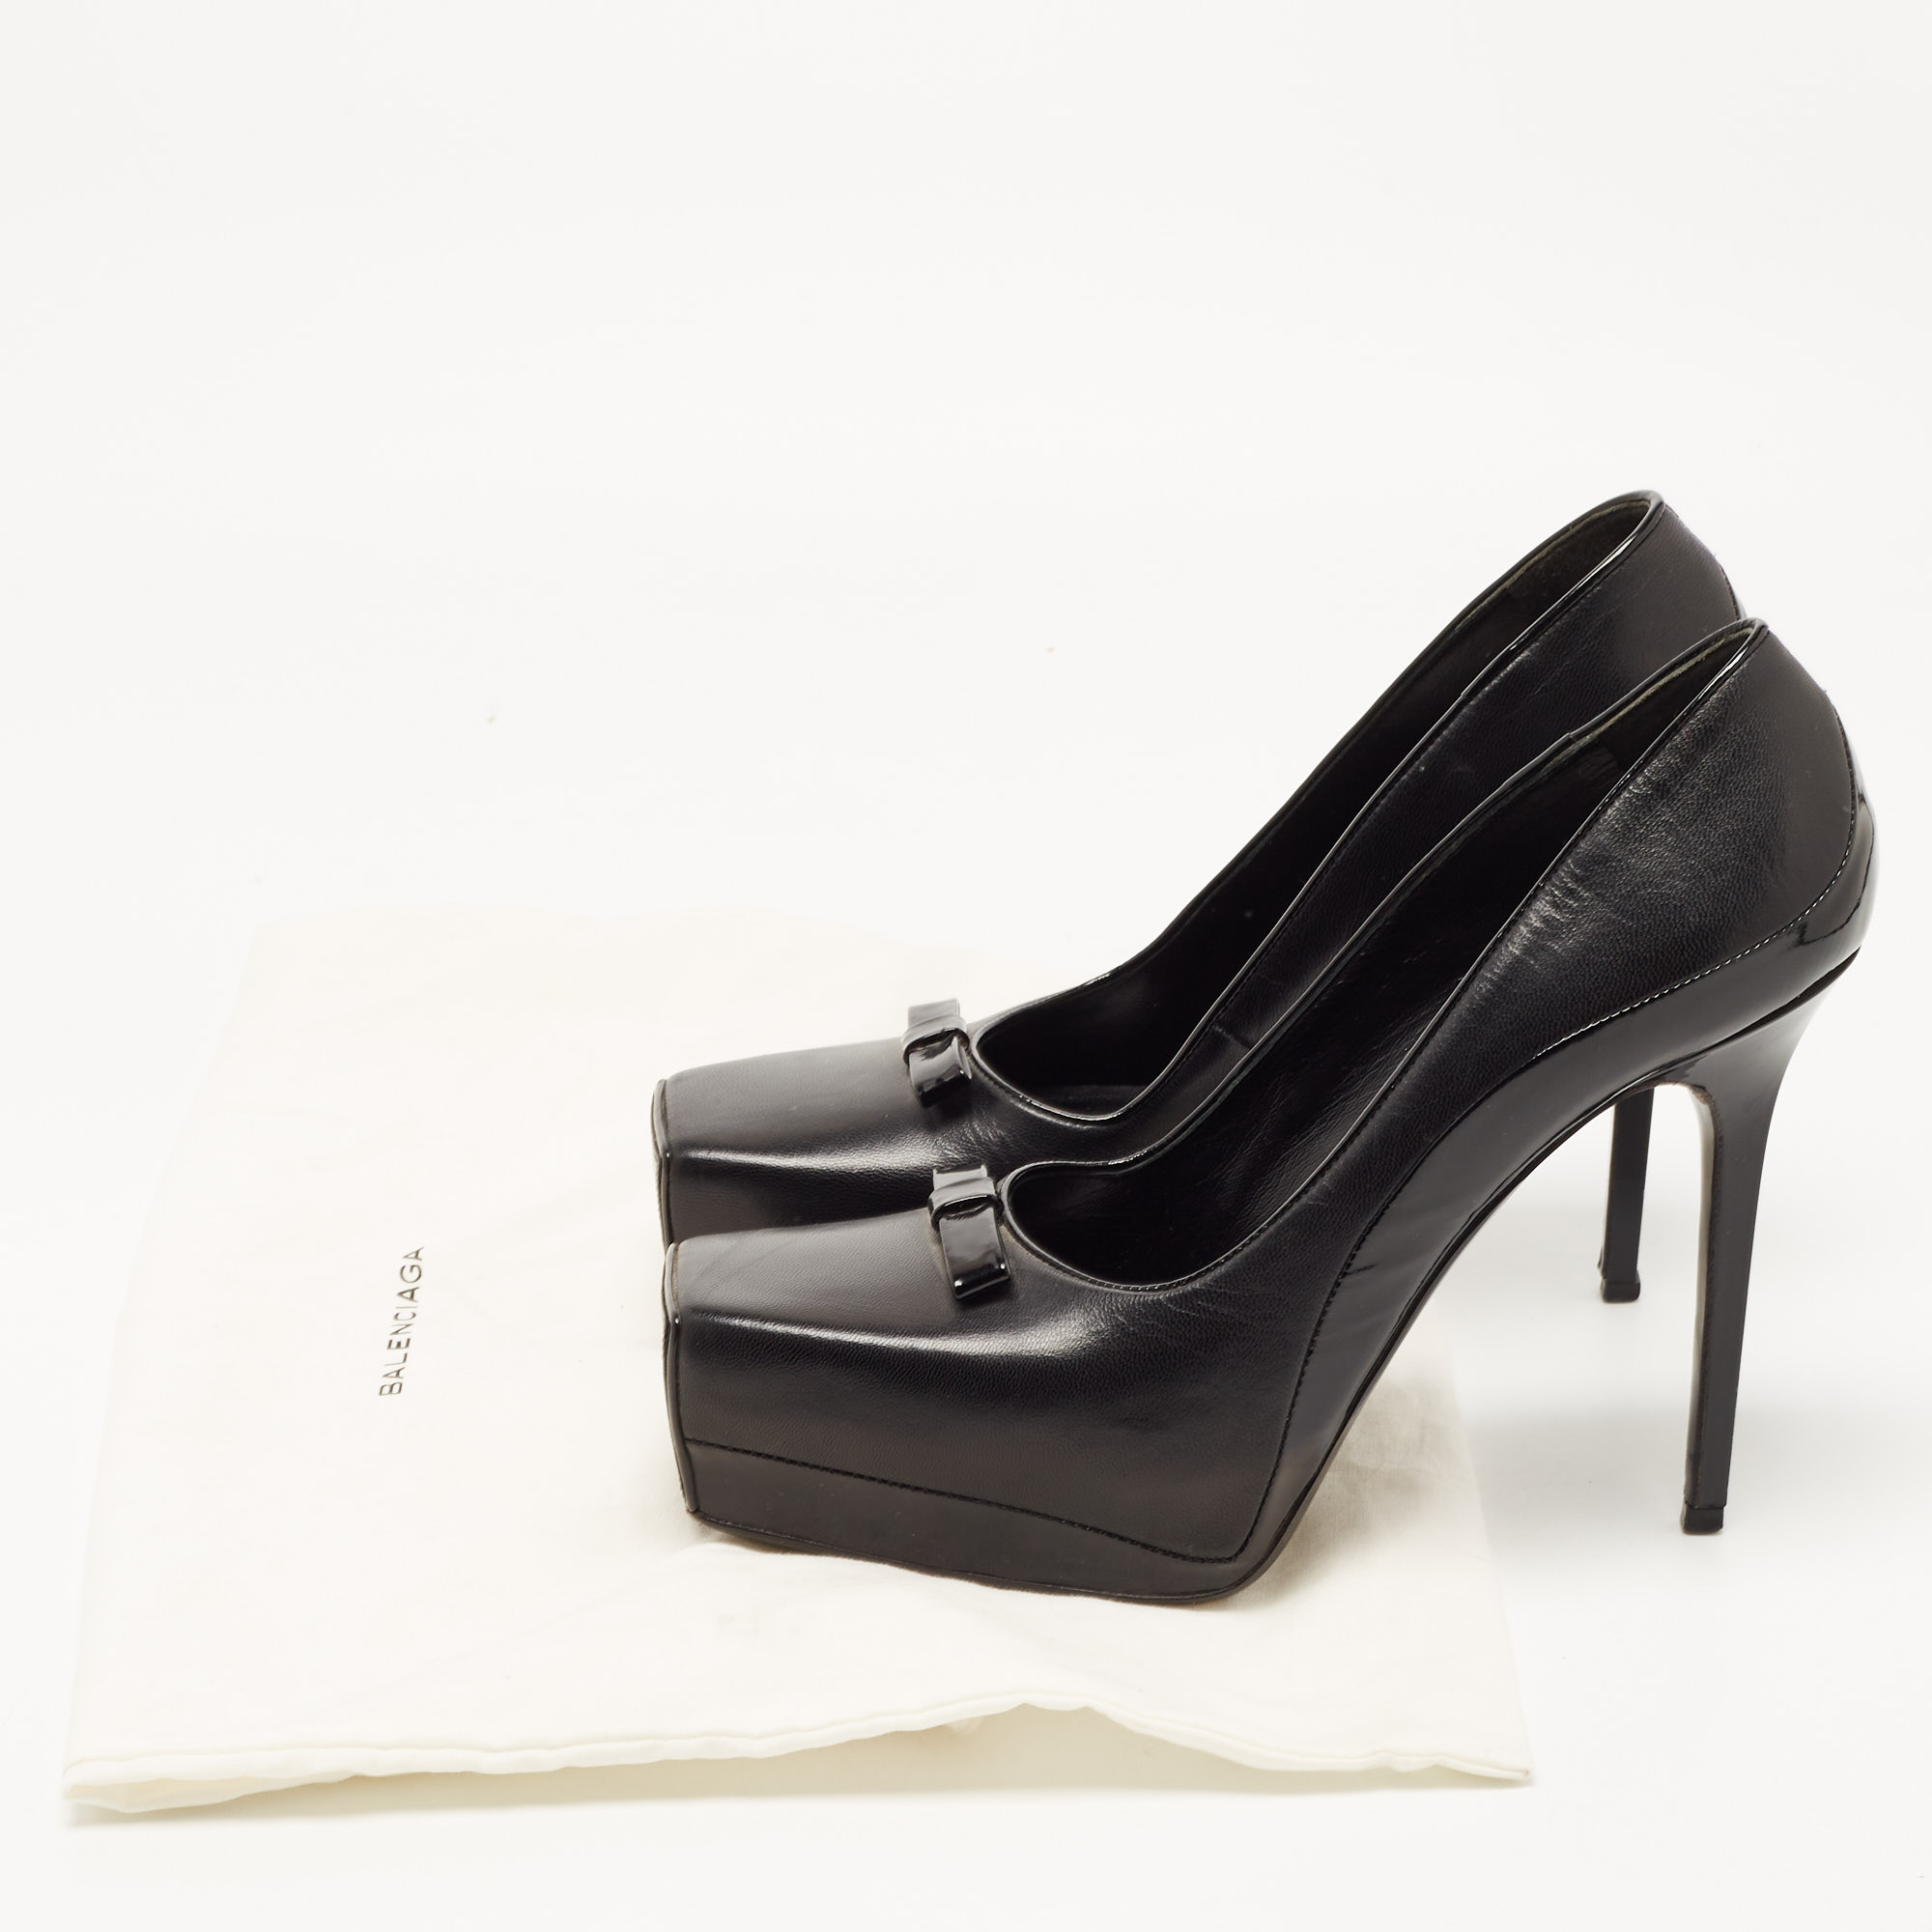 Balenciaga Black Patent And Leather Bow Pumps Size 38.5